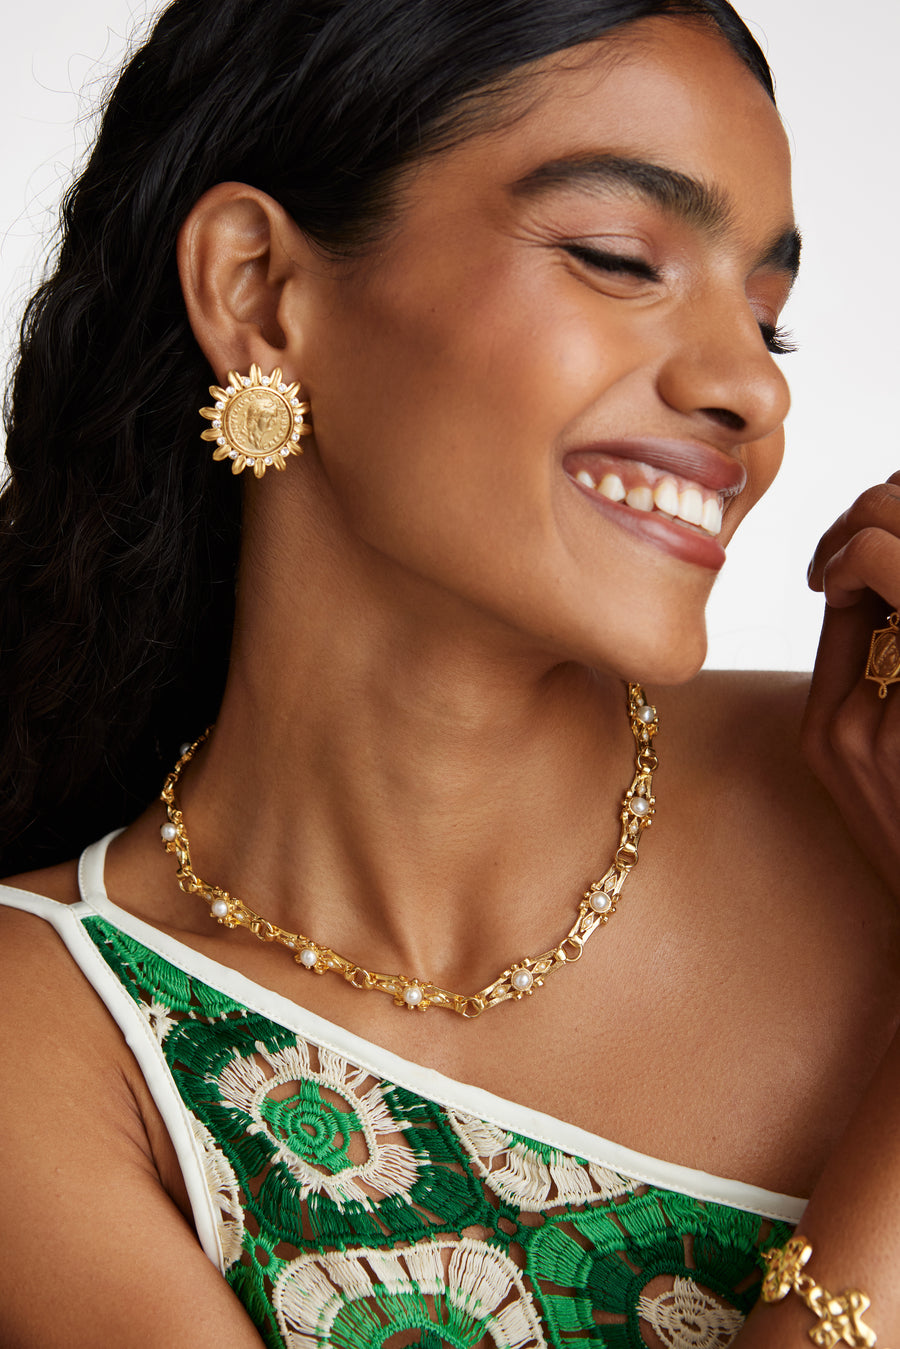 model shot wearing the soru jewellery gold link necklace with pearl detail, gold coin earrings and a chunky gold bracelet while smiling